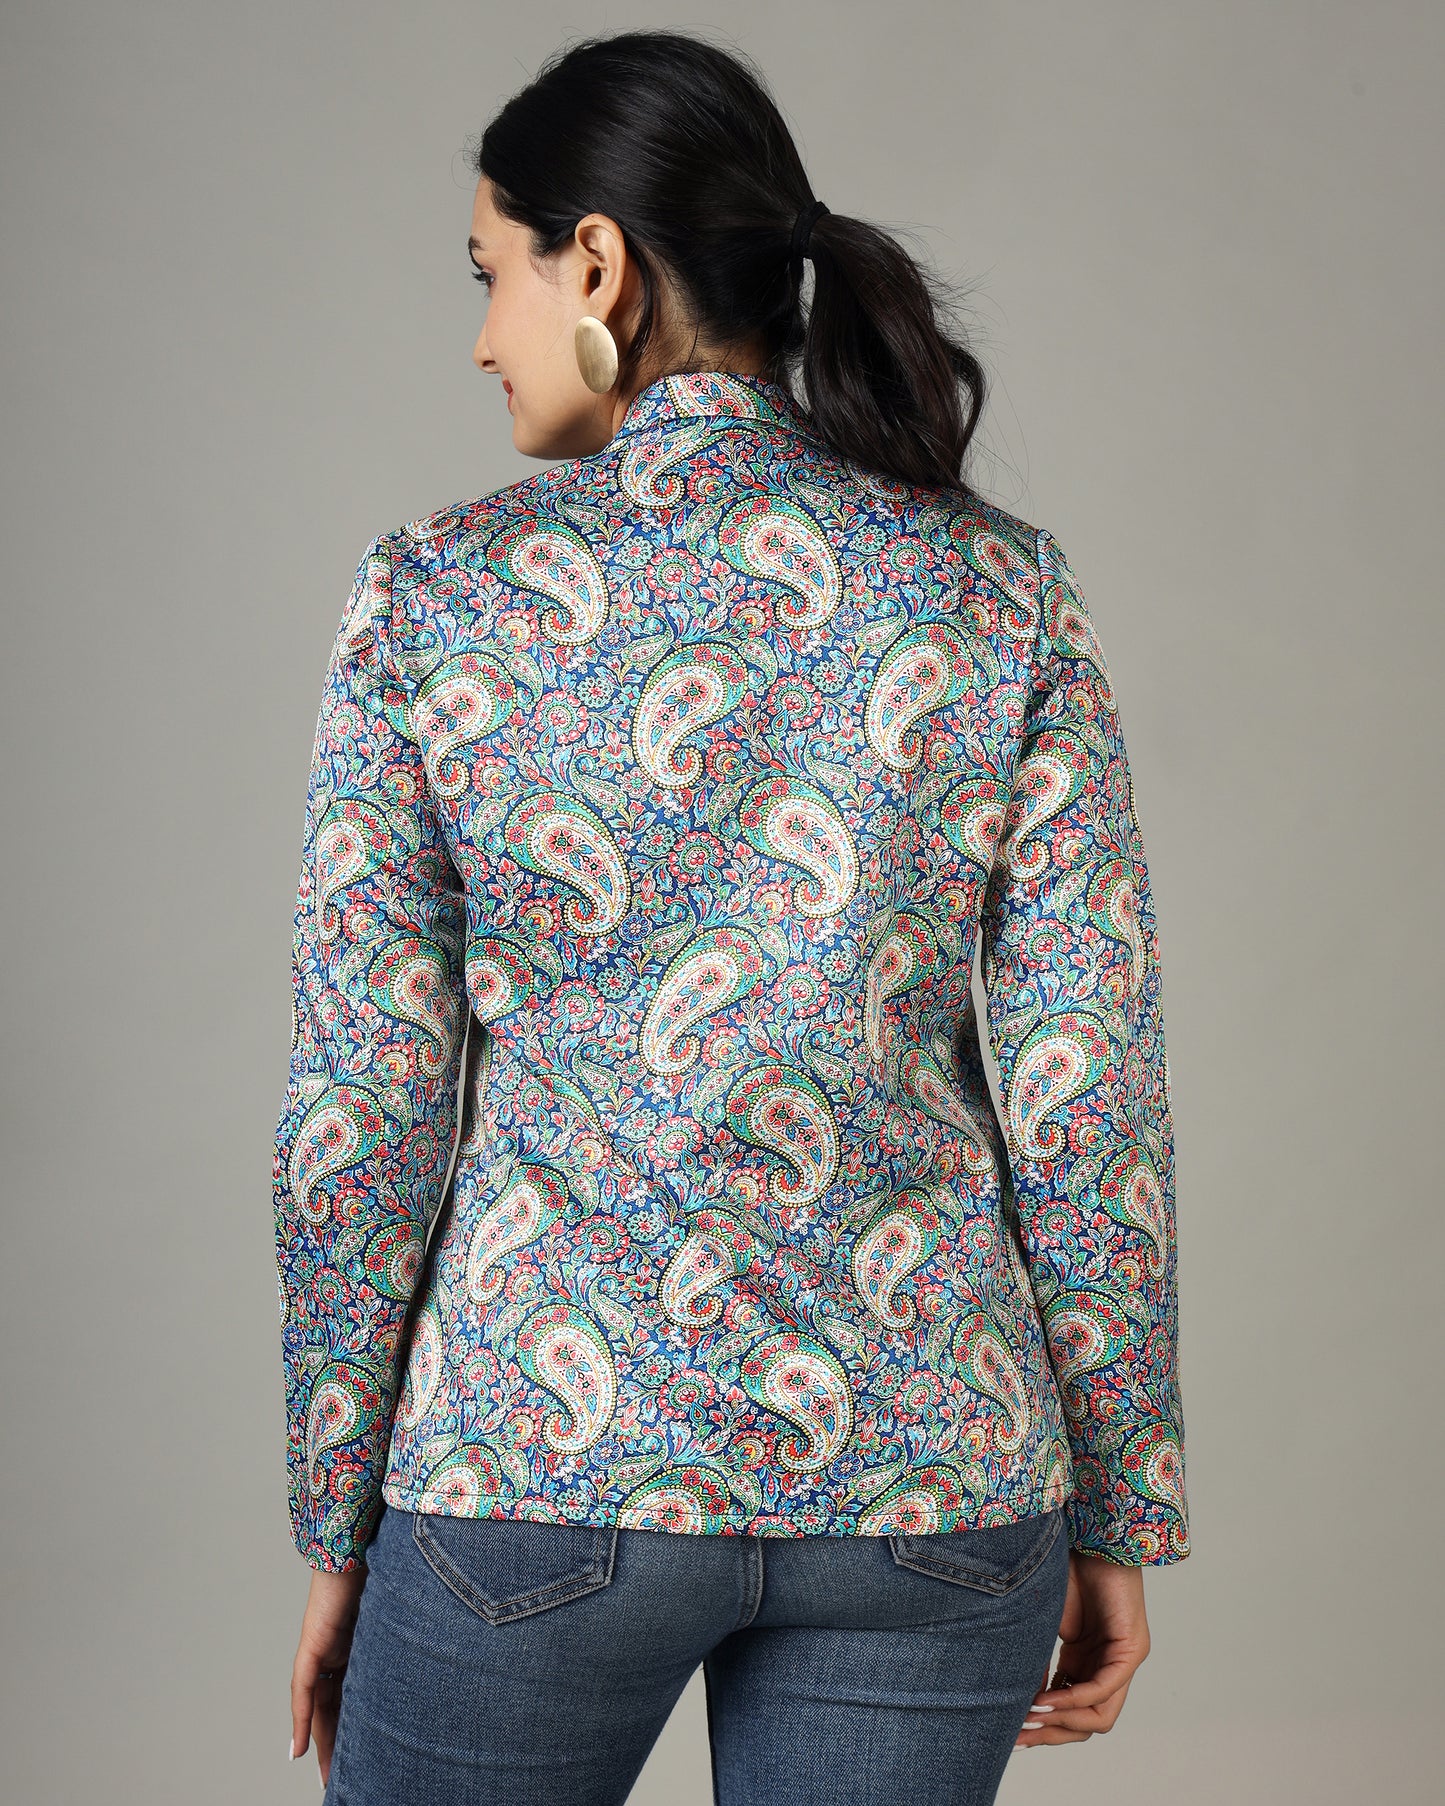 Add Touch of Uniqueness With Paisley Jacket